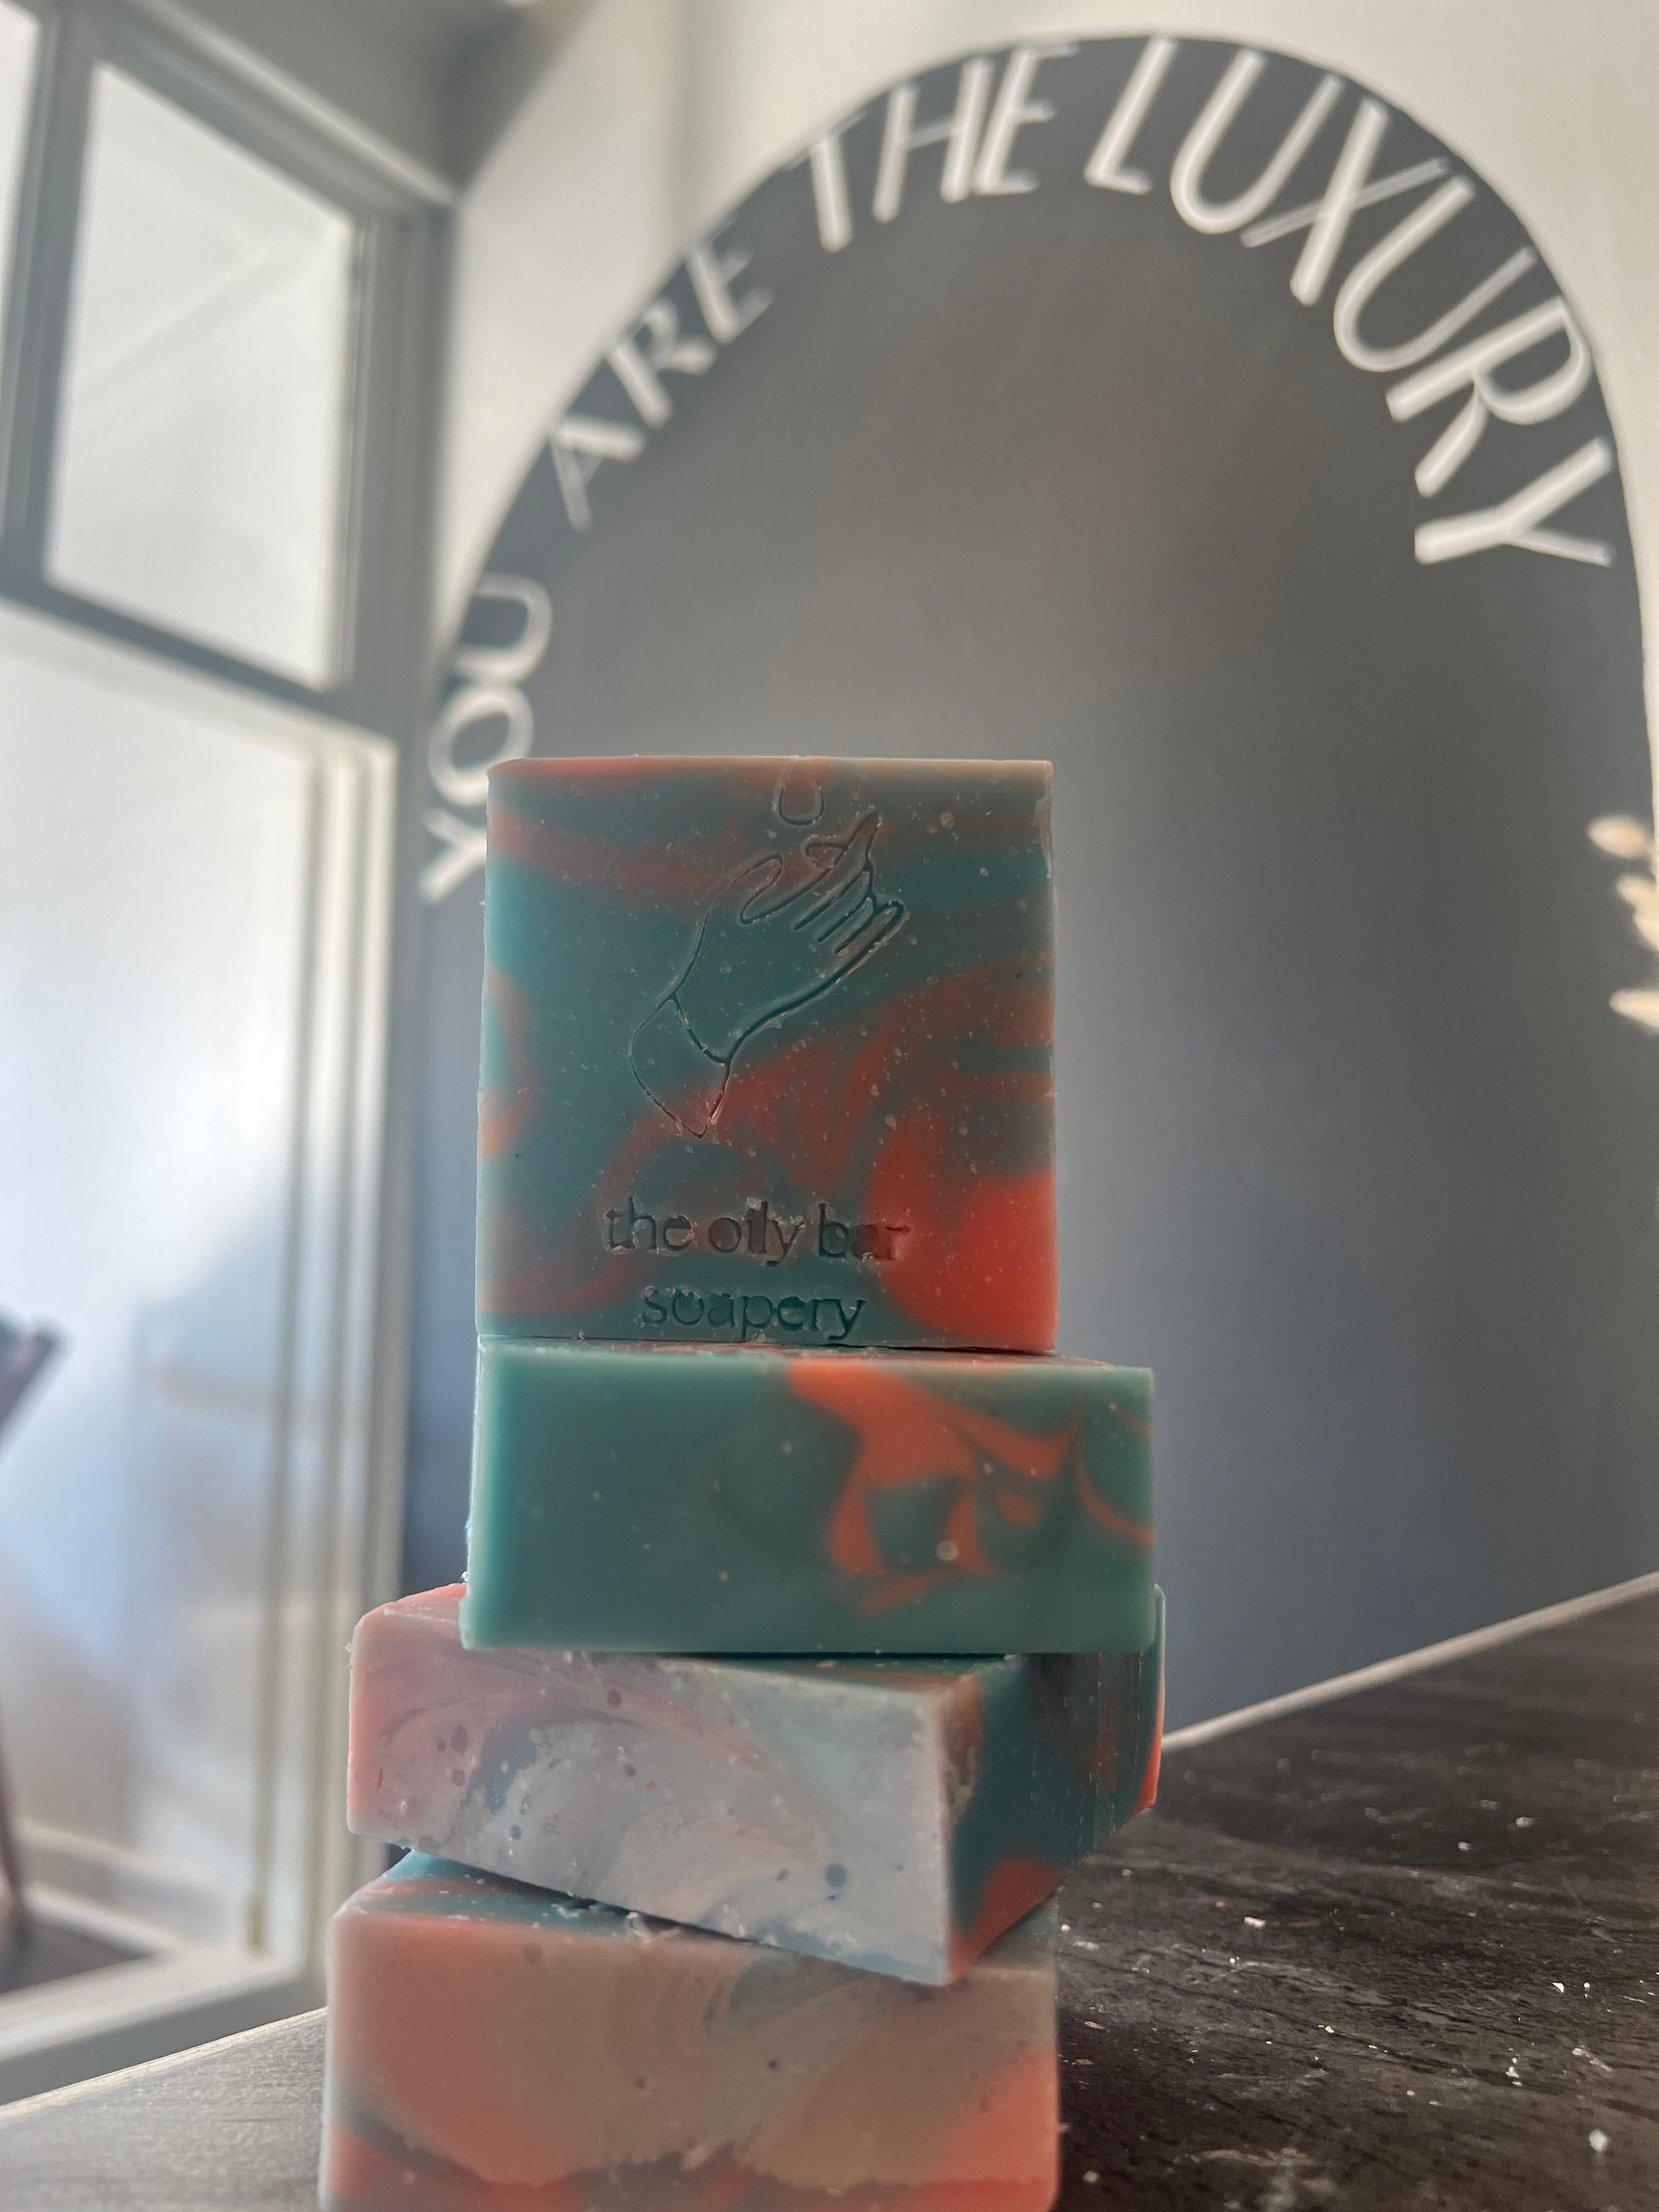 The Soap Box – The Oily Bar Soapery